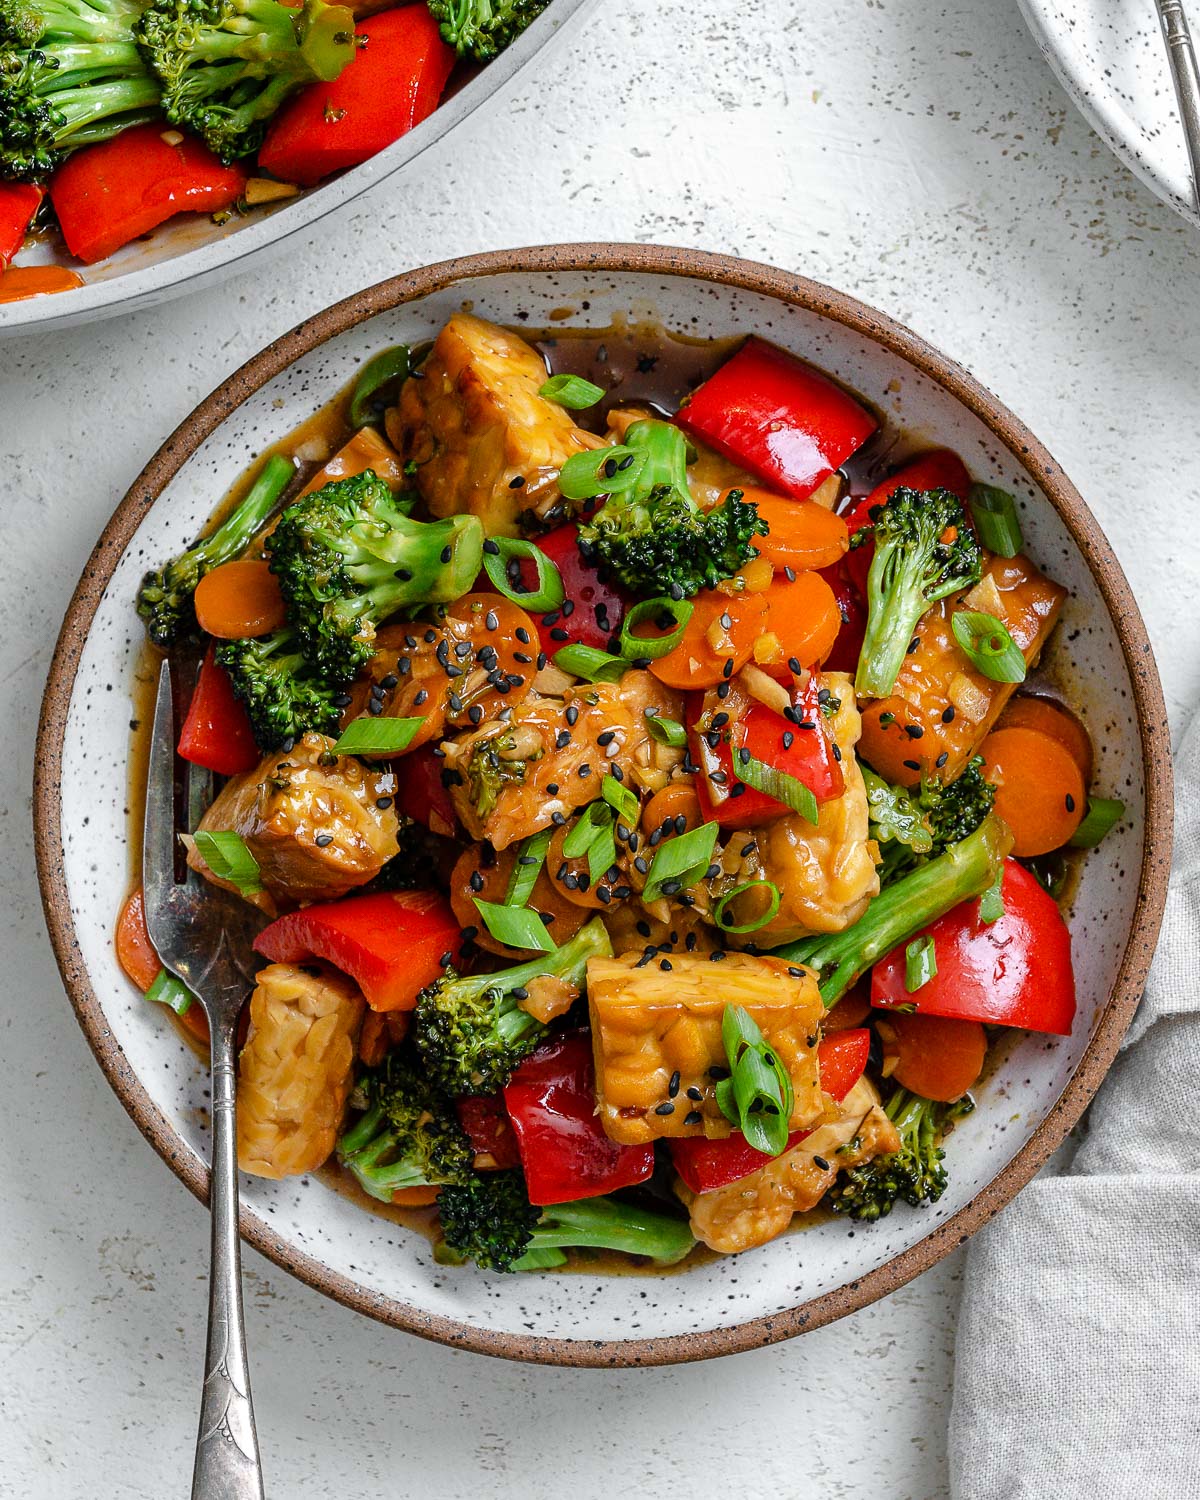 completed Easy Tempeh Stir-Fry plated on a white plate against a white surface